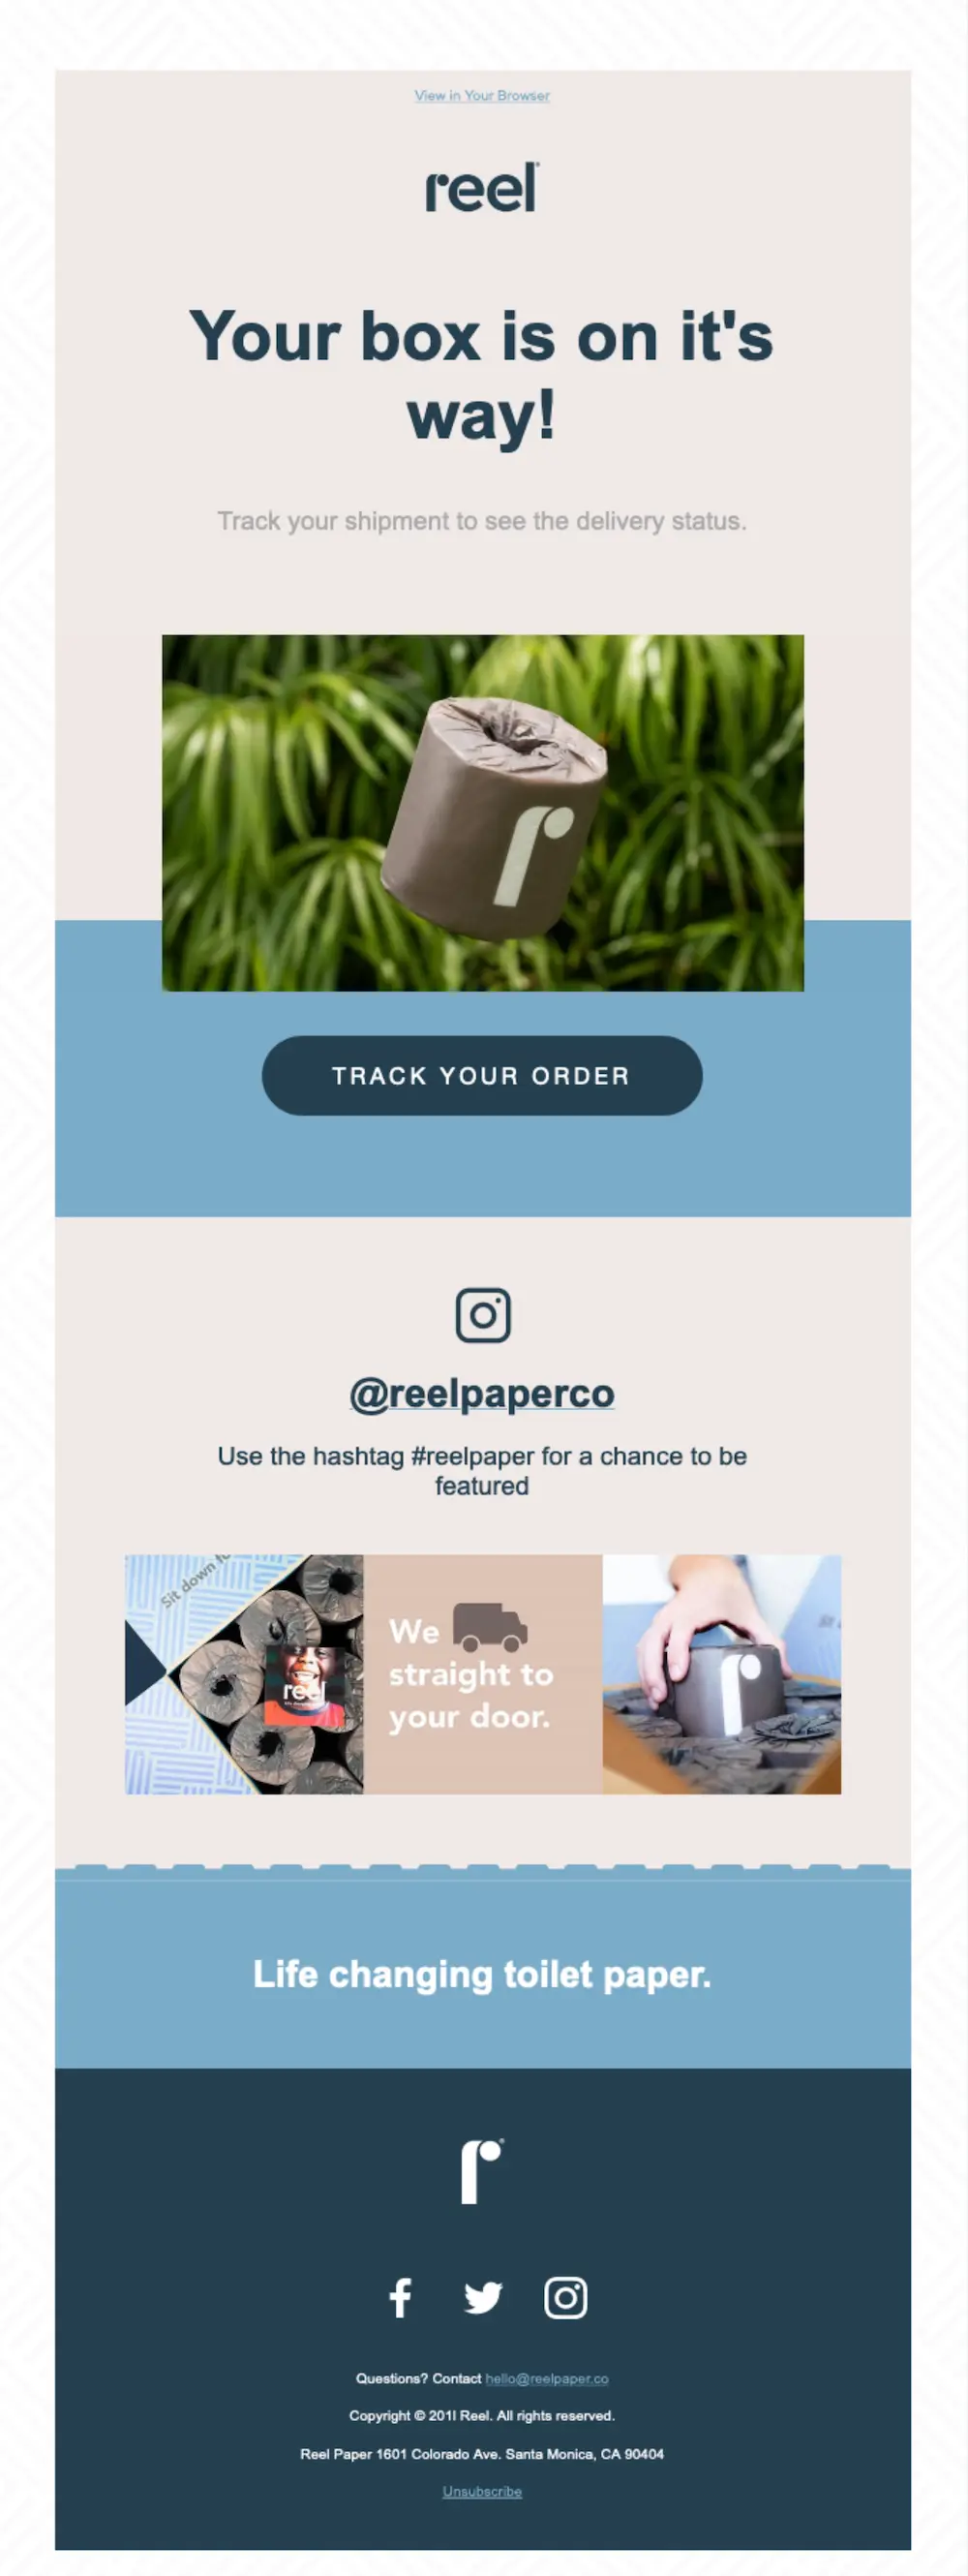 Reel's shipping confirmation email says "Your box is on it's way" with a picture of a roll of toilet paper, branded design, and a preview of their Instagram.